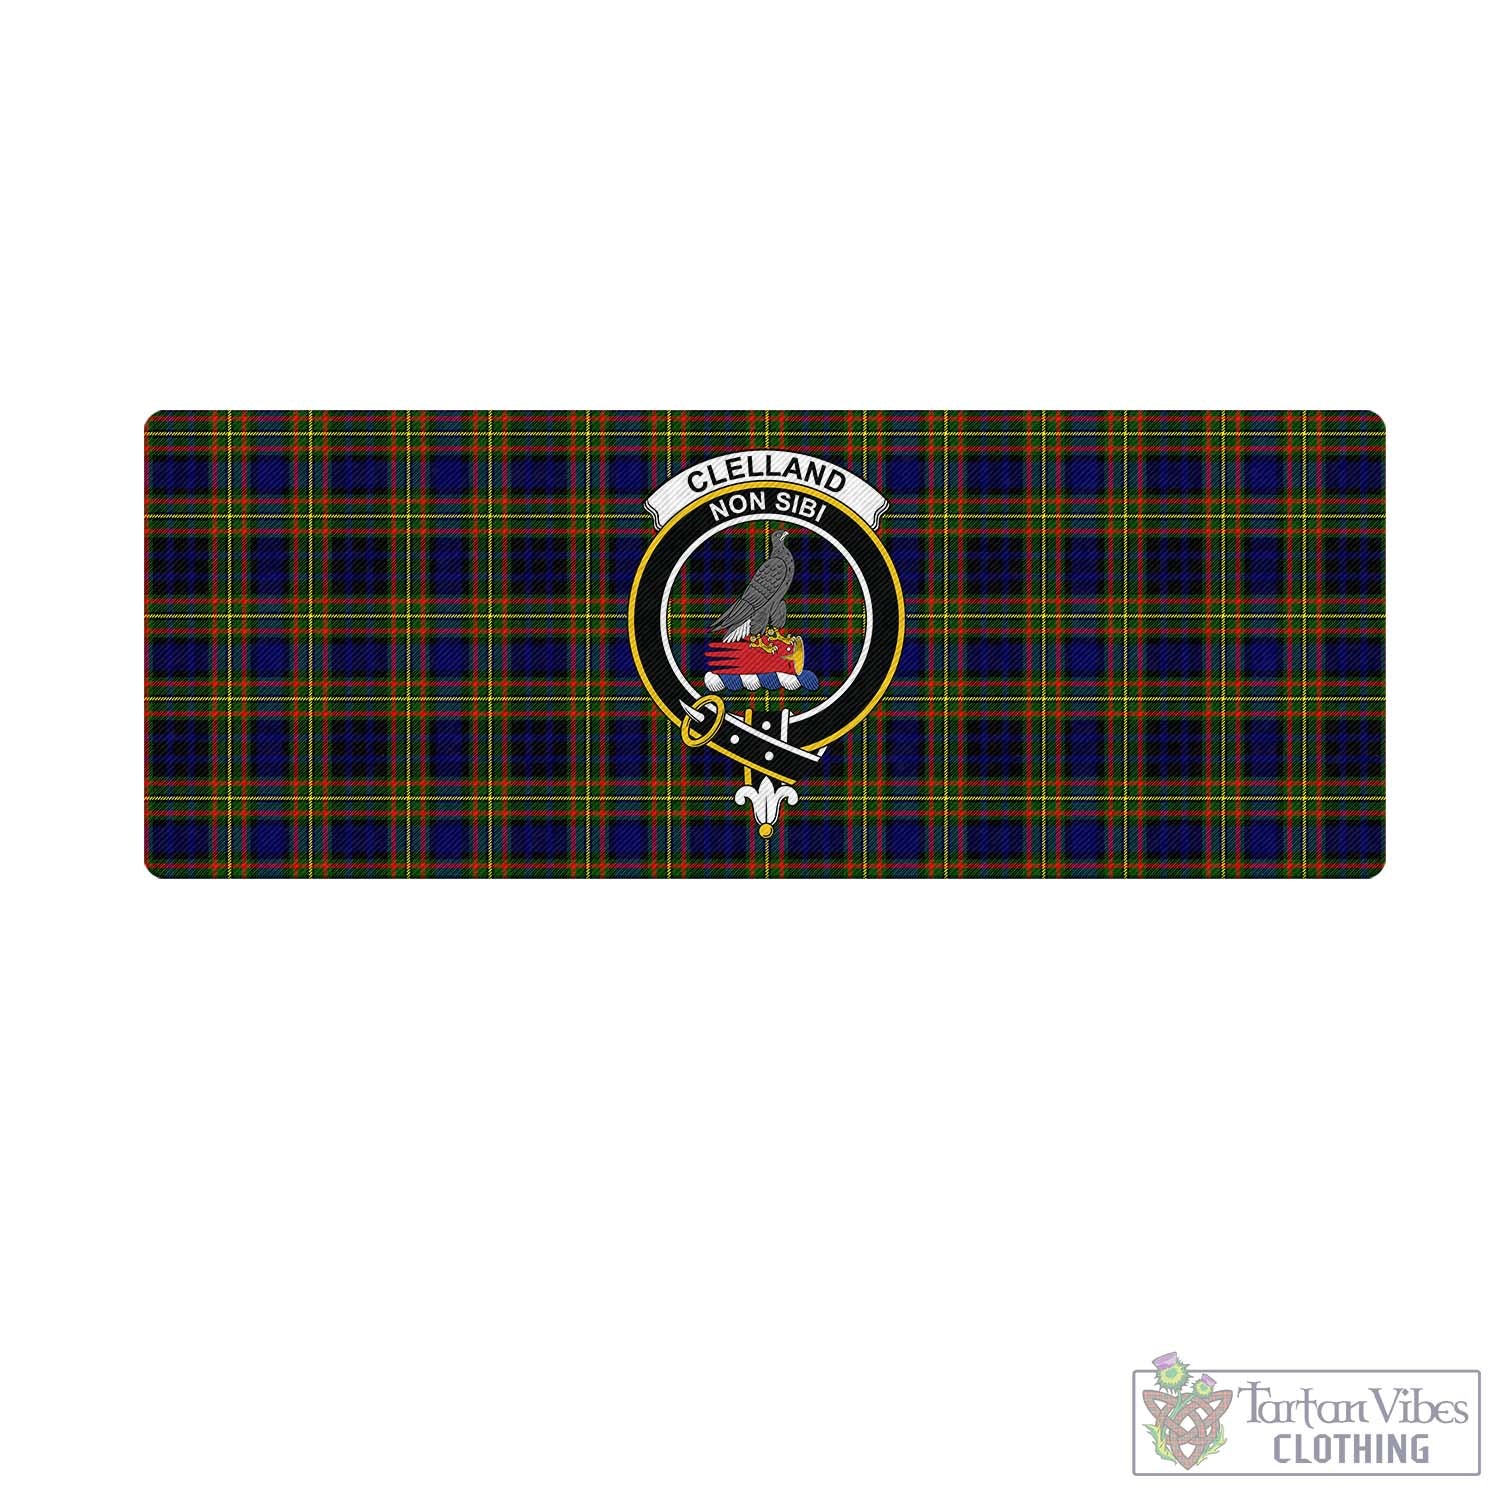 Tartan Vibes Clothing Clelland Modern Tartan Mouse Pad with Family Crest